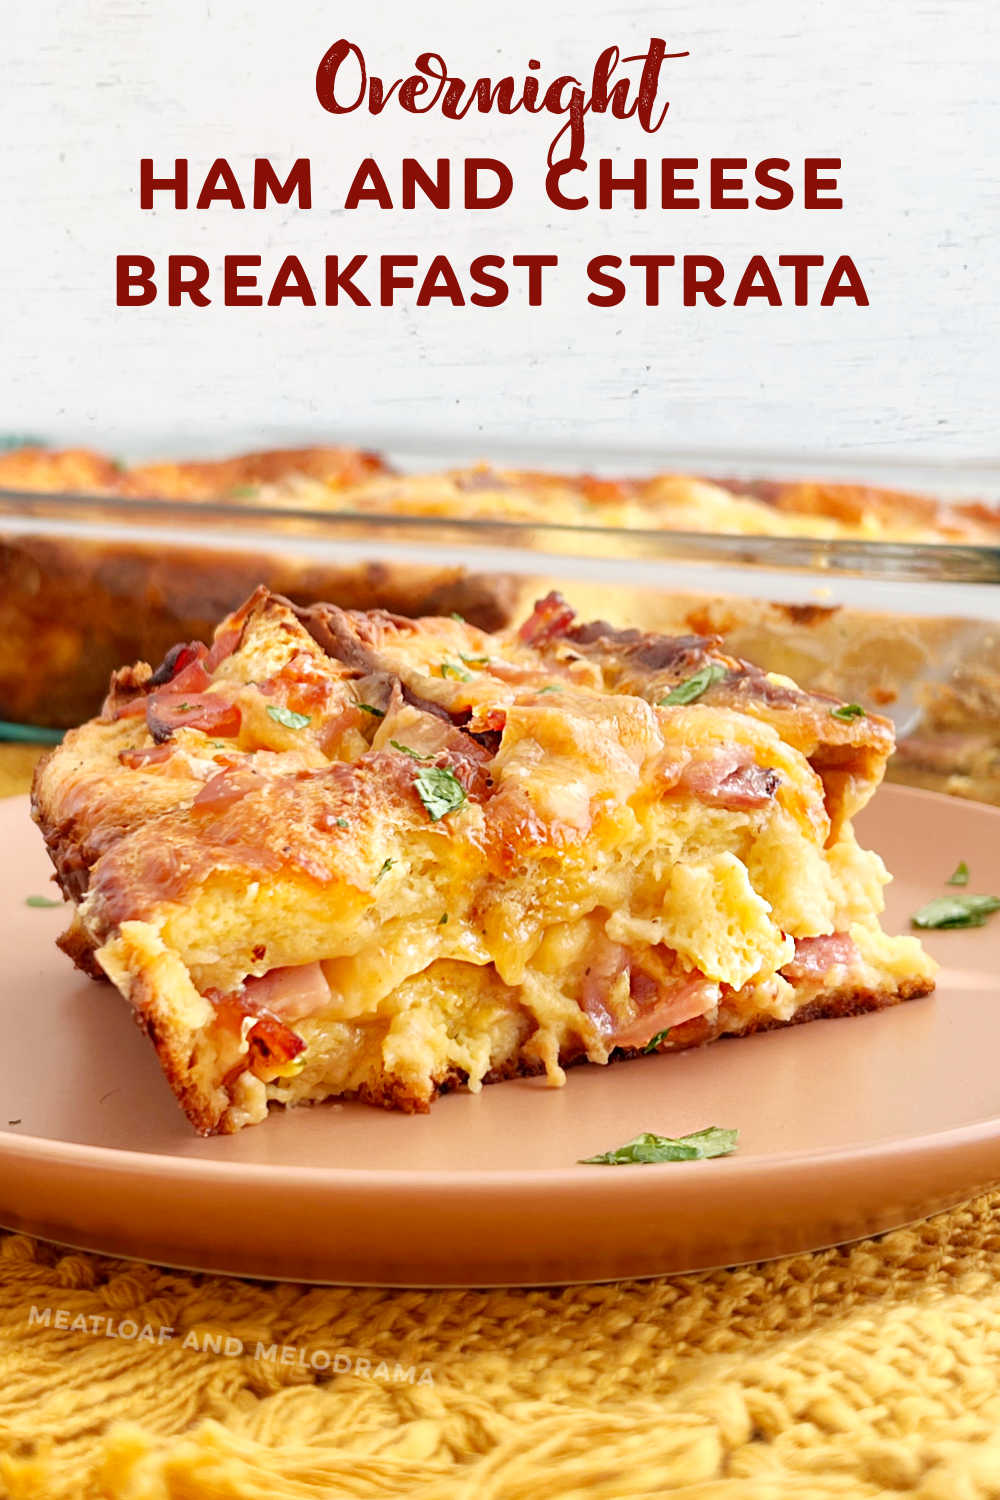 This Ham and Cheese Strata recipe is an easy make ahead breakfast casserole made with layers of ham, brioche bread, cheddar cheese and eggs. This savory overnight casserole makes a delicious holiday breakfast or brunch! via @meamel